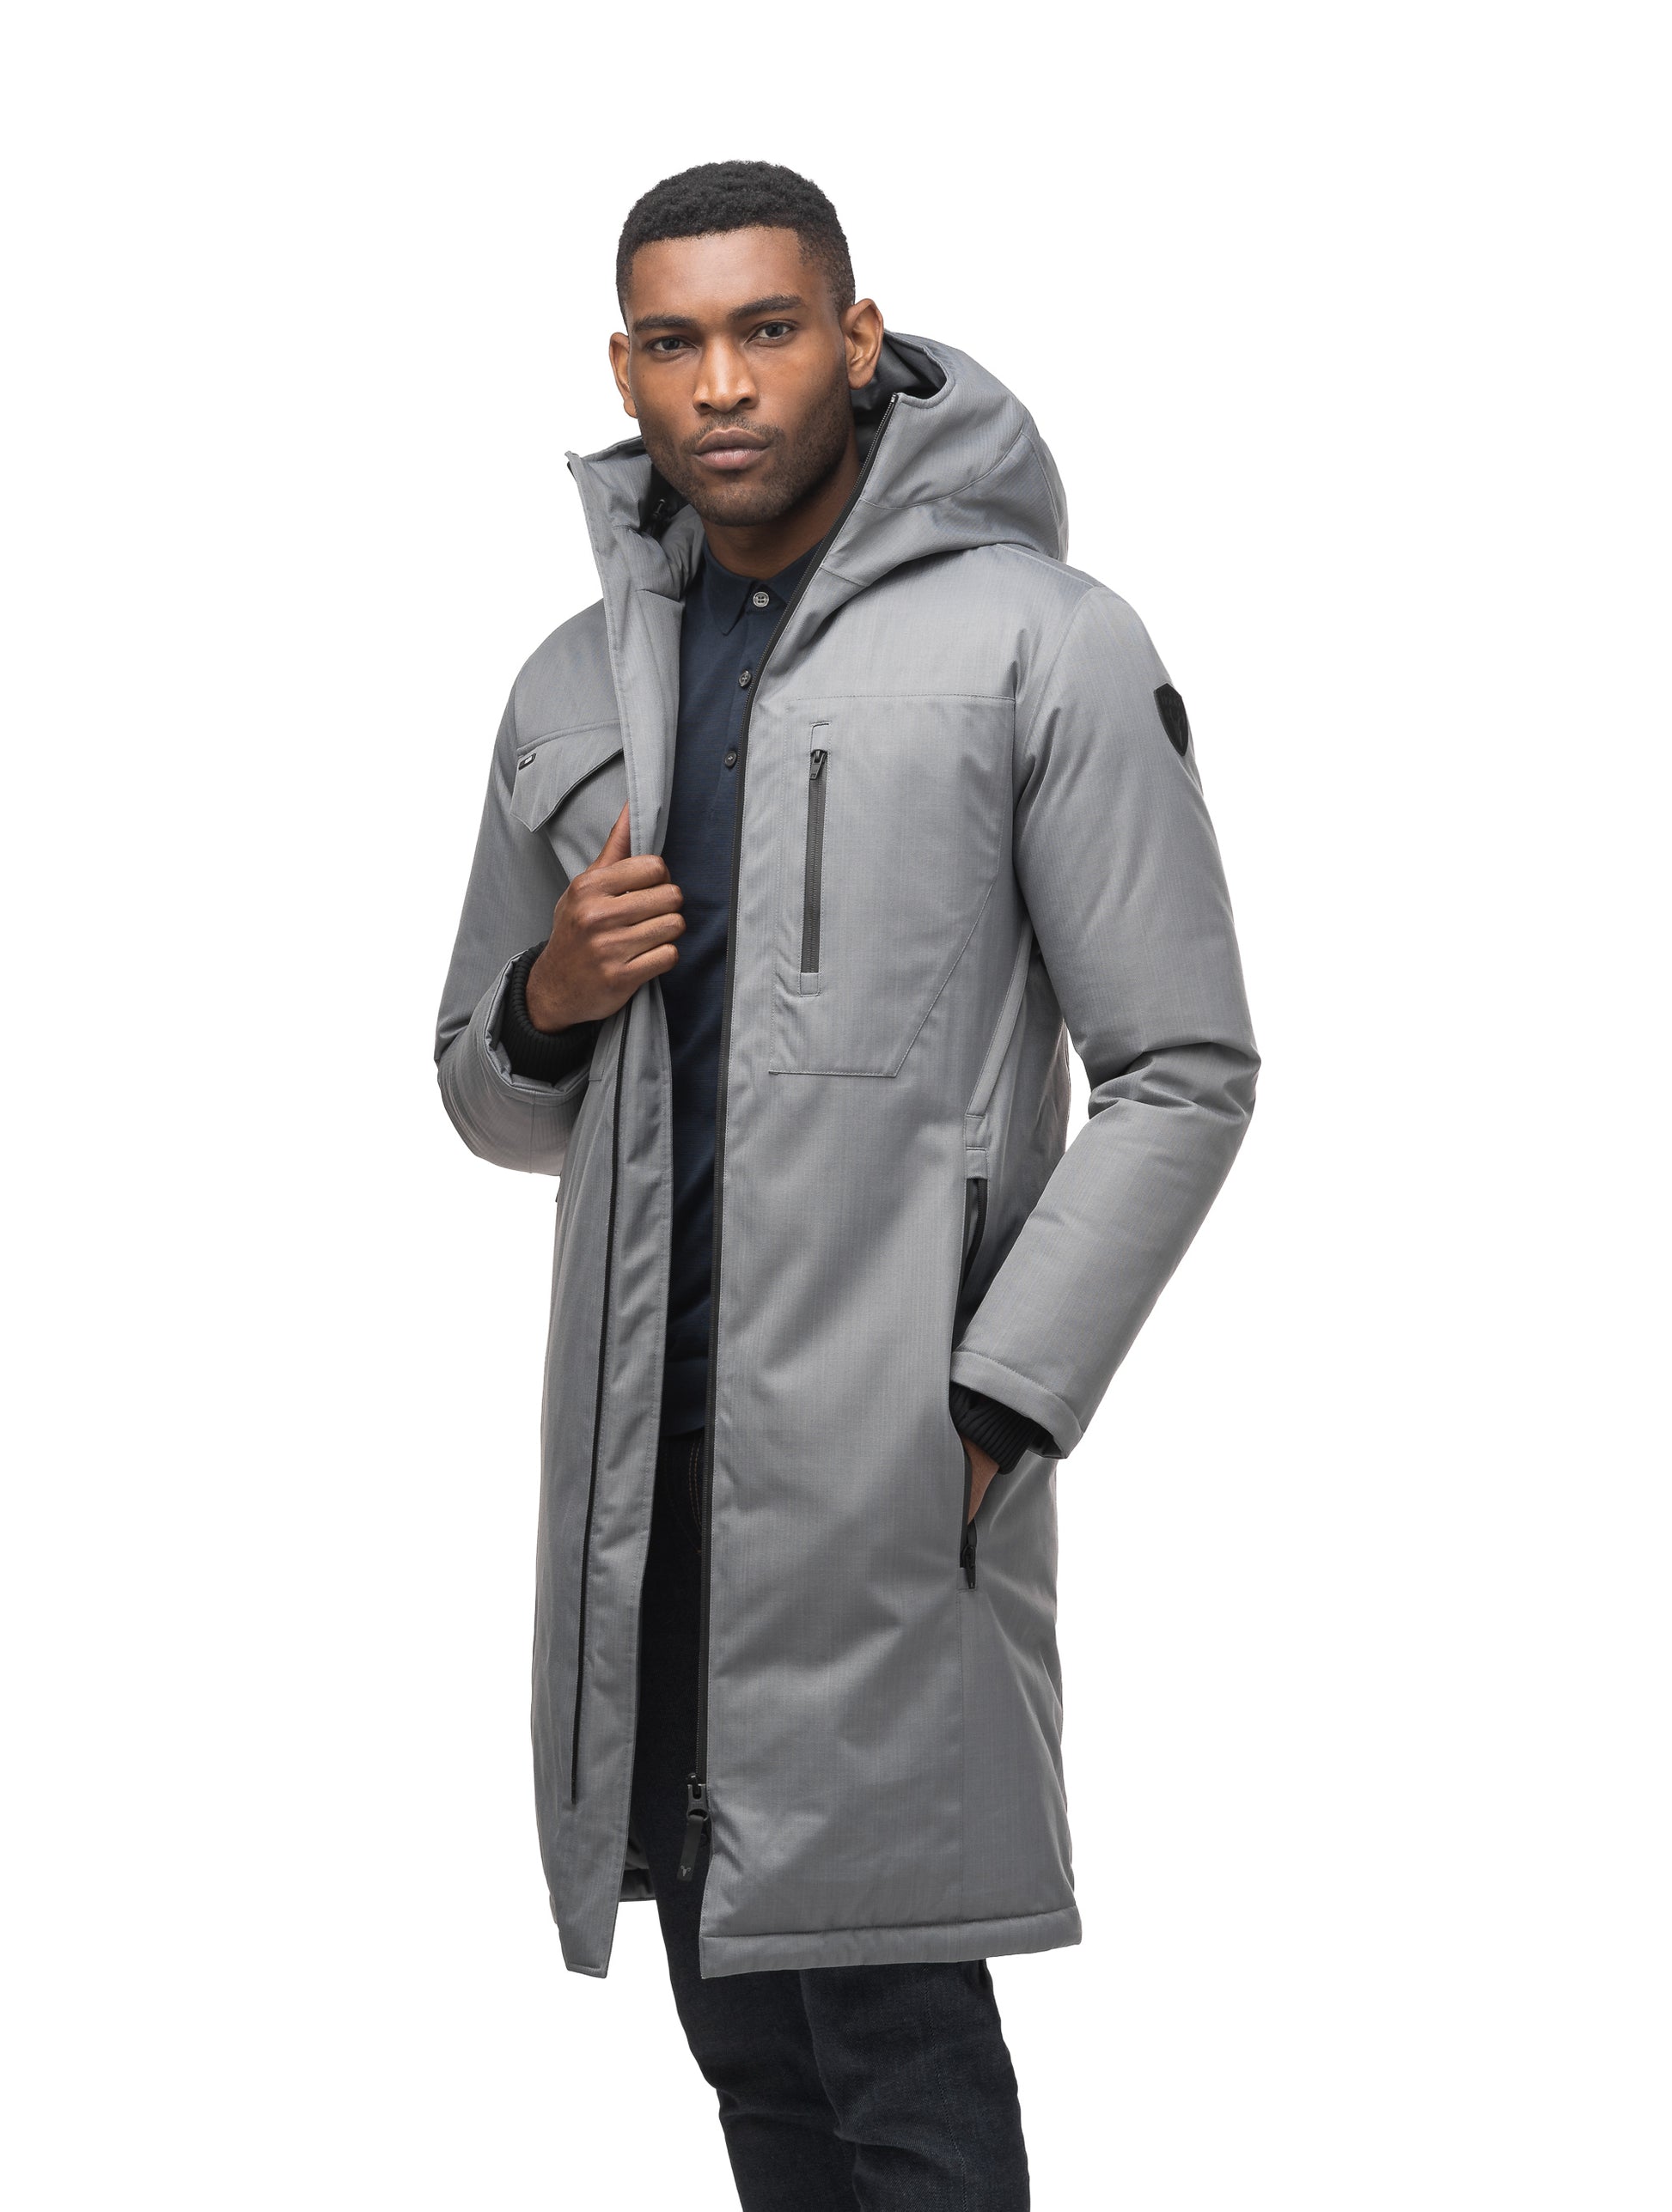 Long men's calf length parka with down fill and exposed zipper that features spacious pockets and zippered vents in Concrete